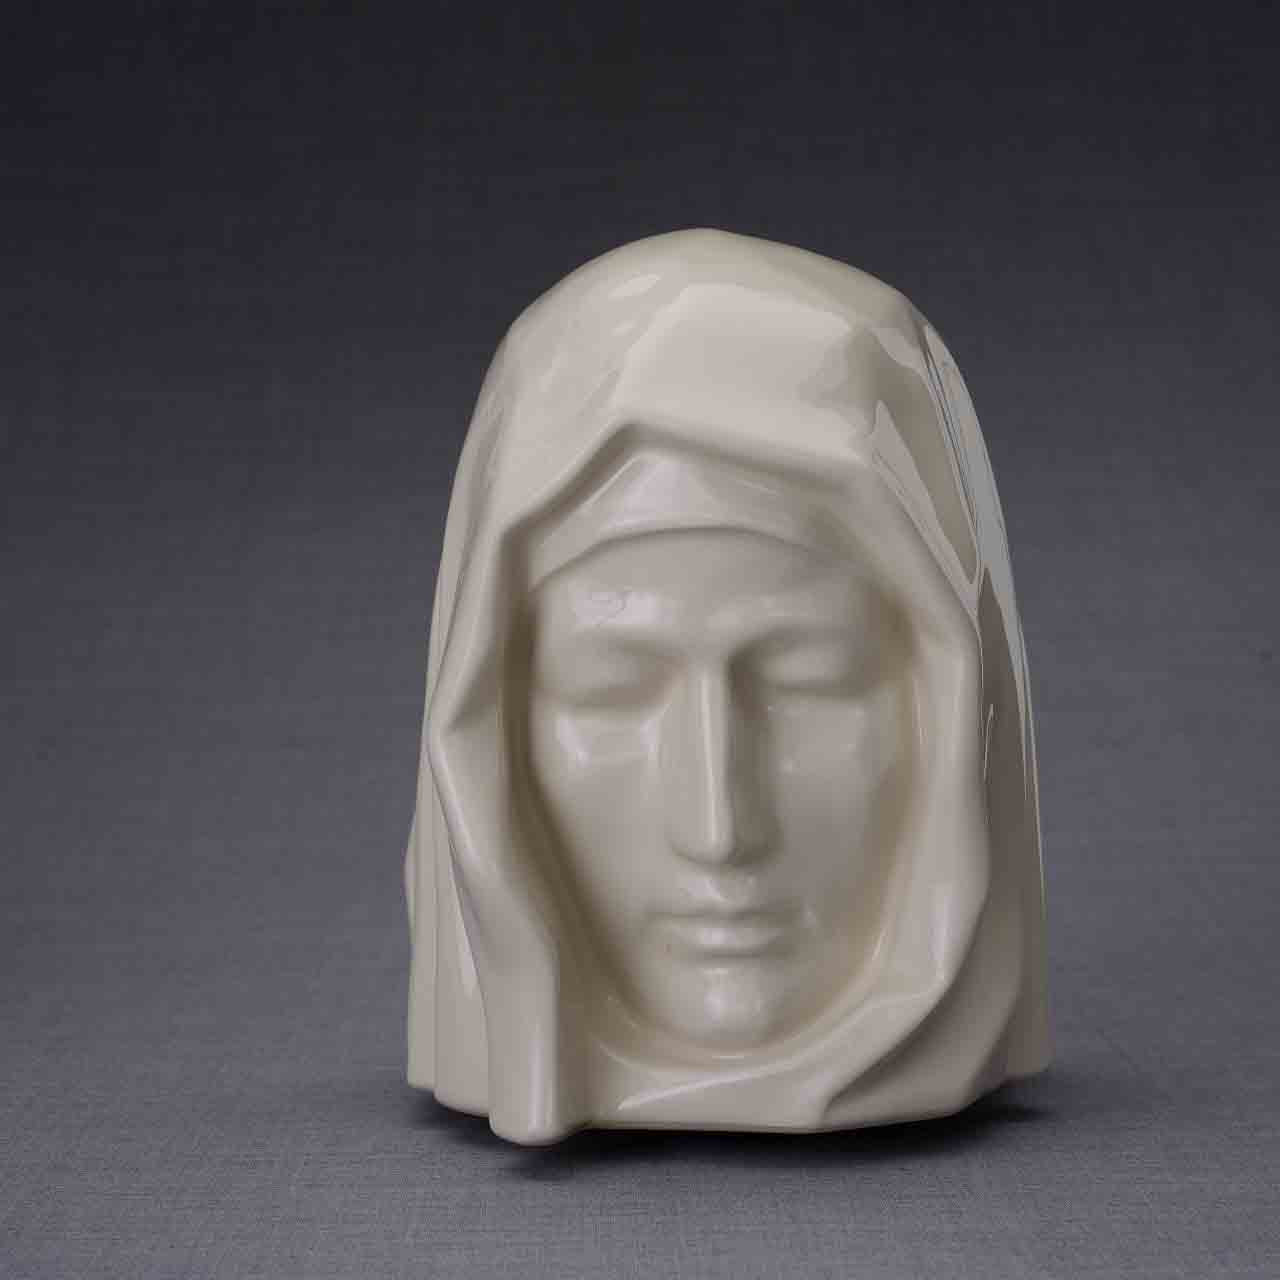 The Holy Mother Cremation Urn for Ashes in Cream Dark Background